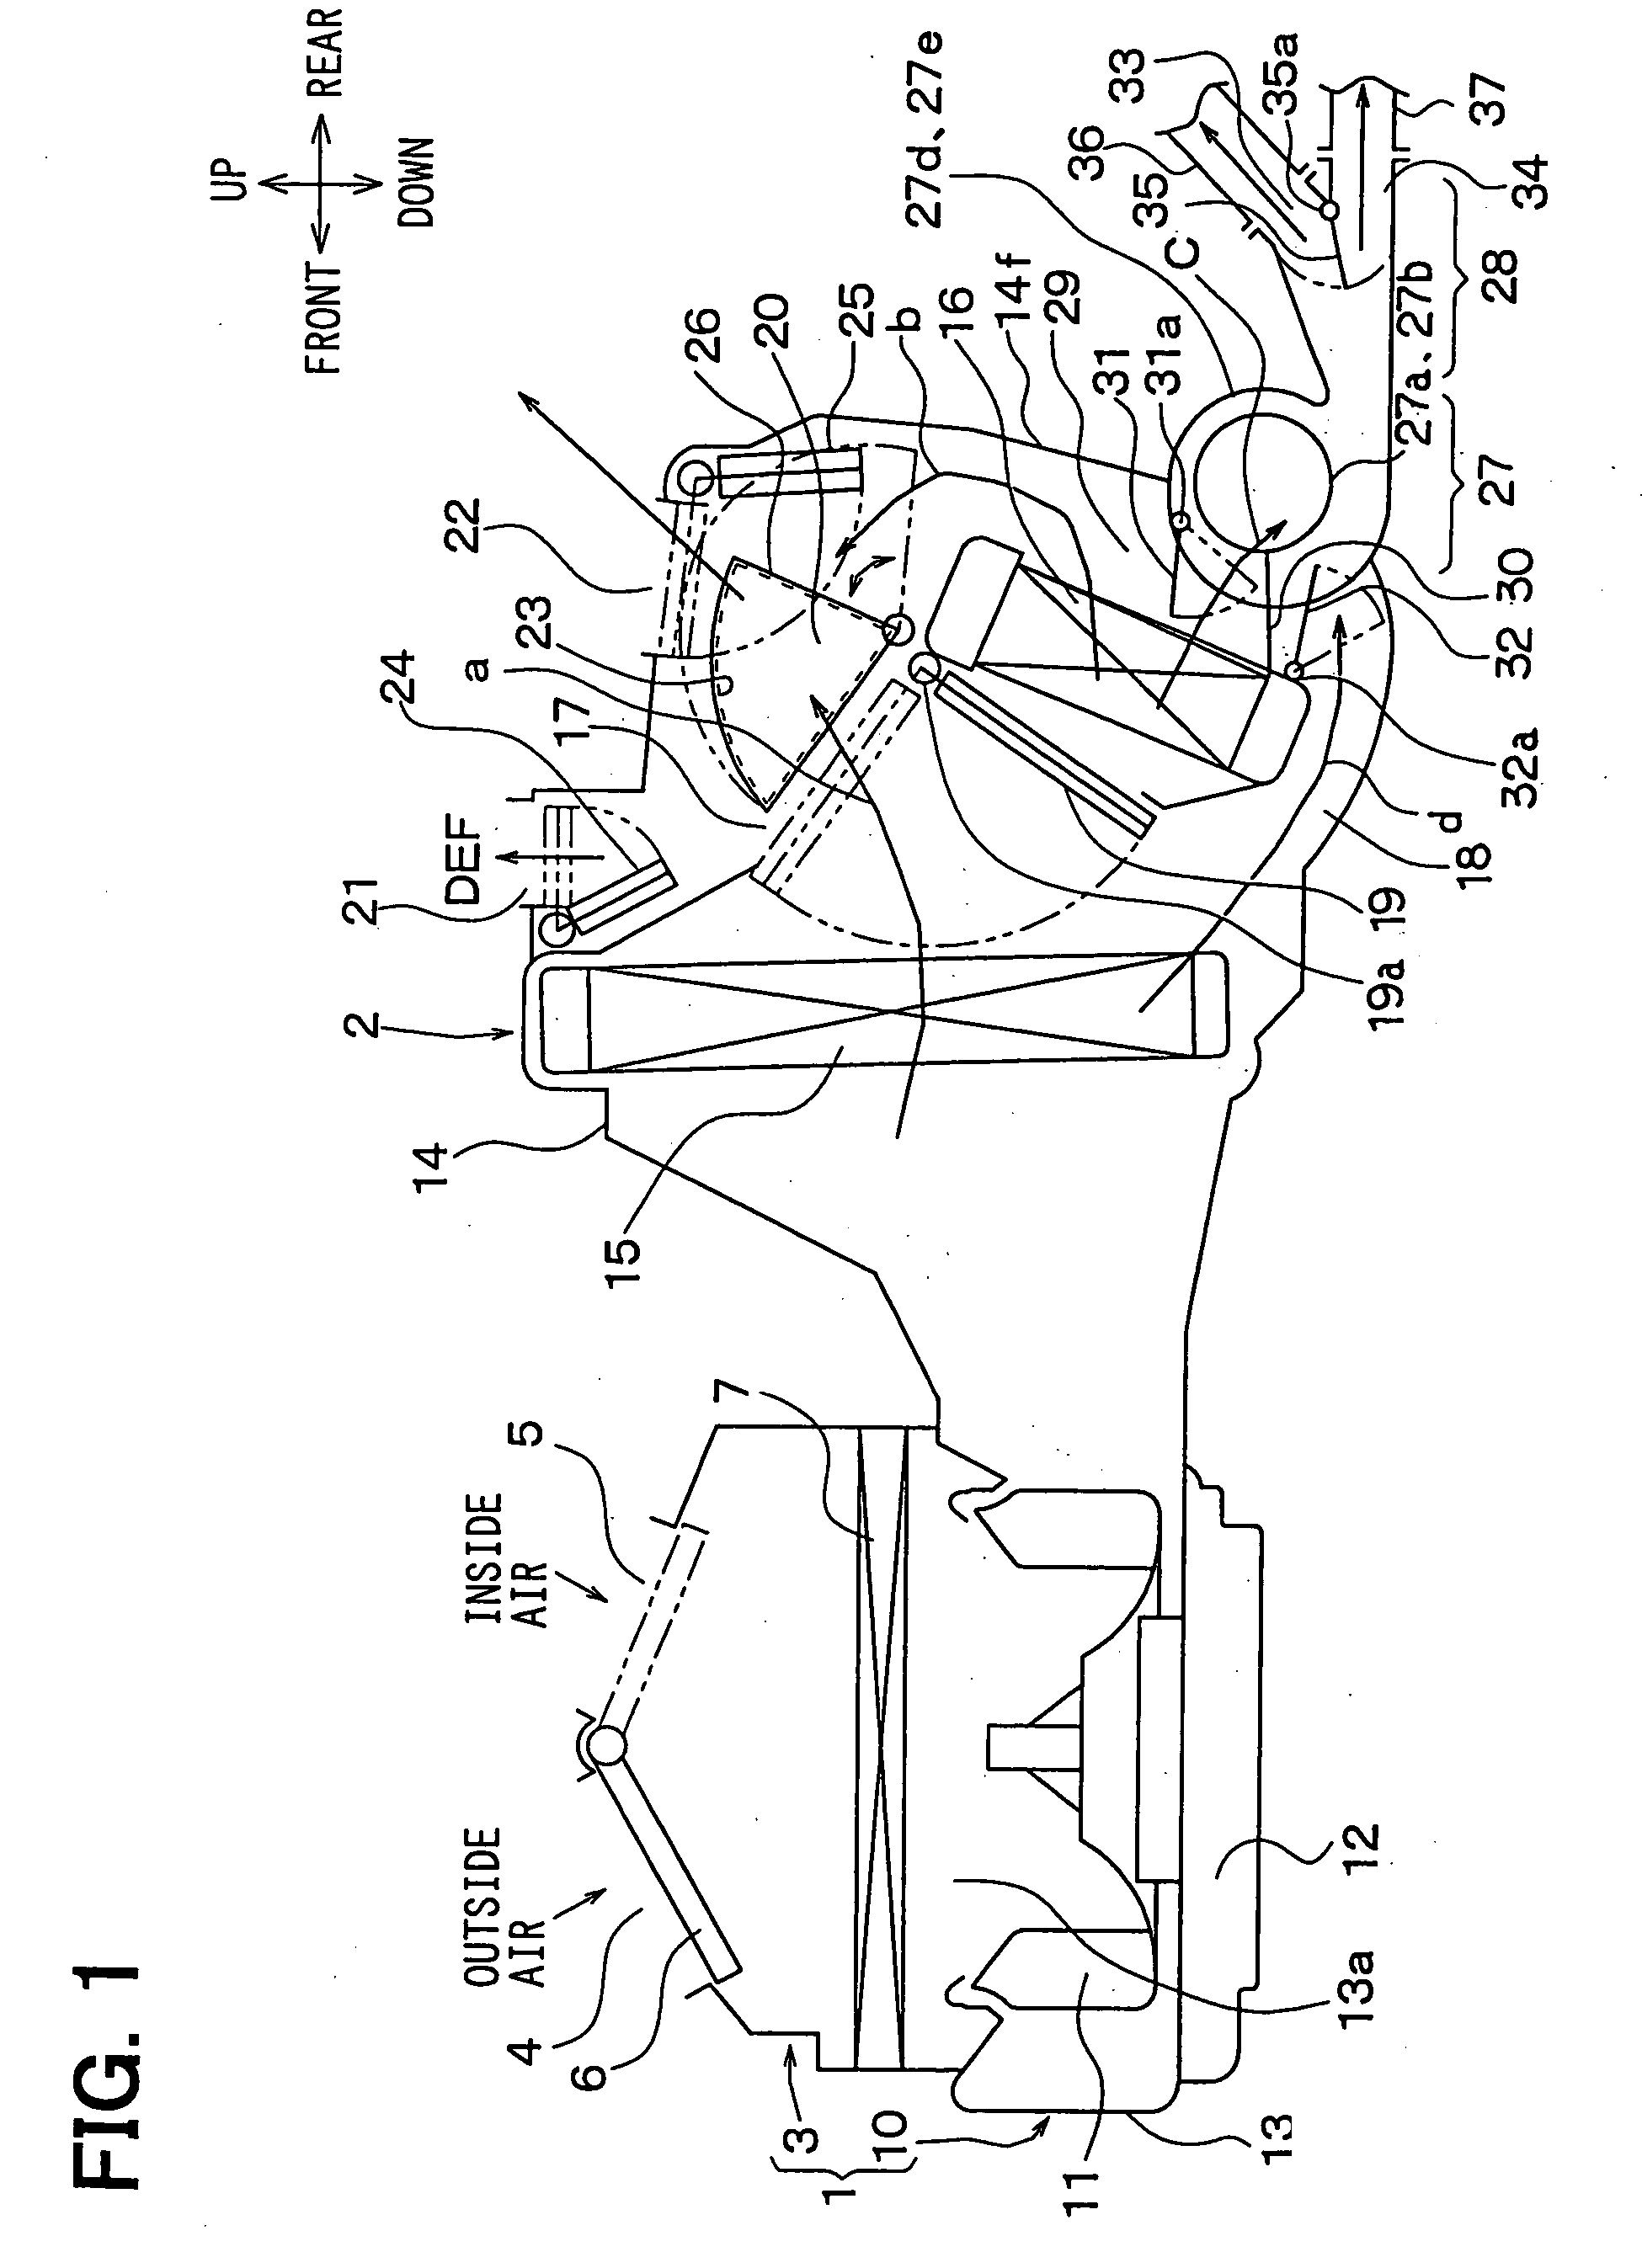 Vehicle air conditioner with main blower and sub-blower